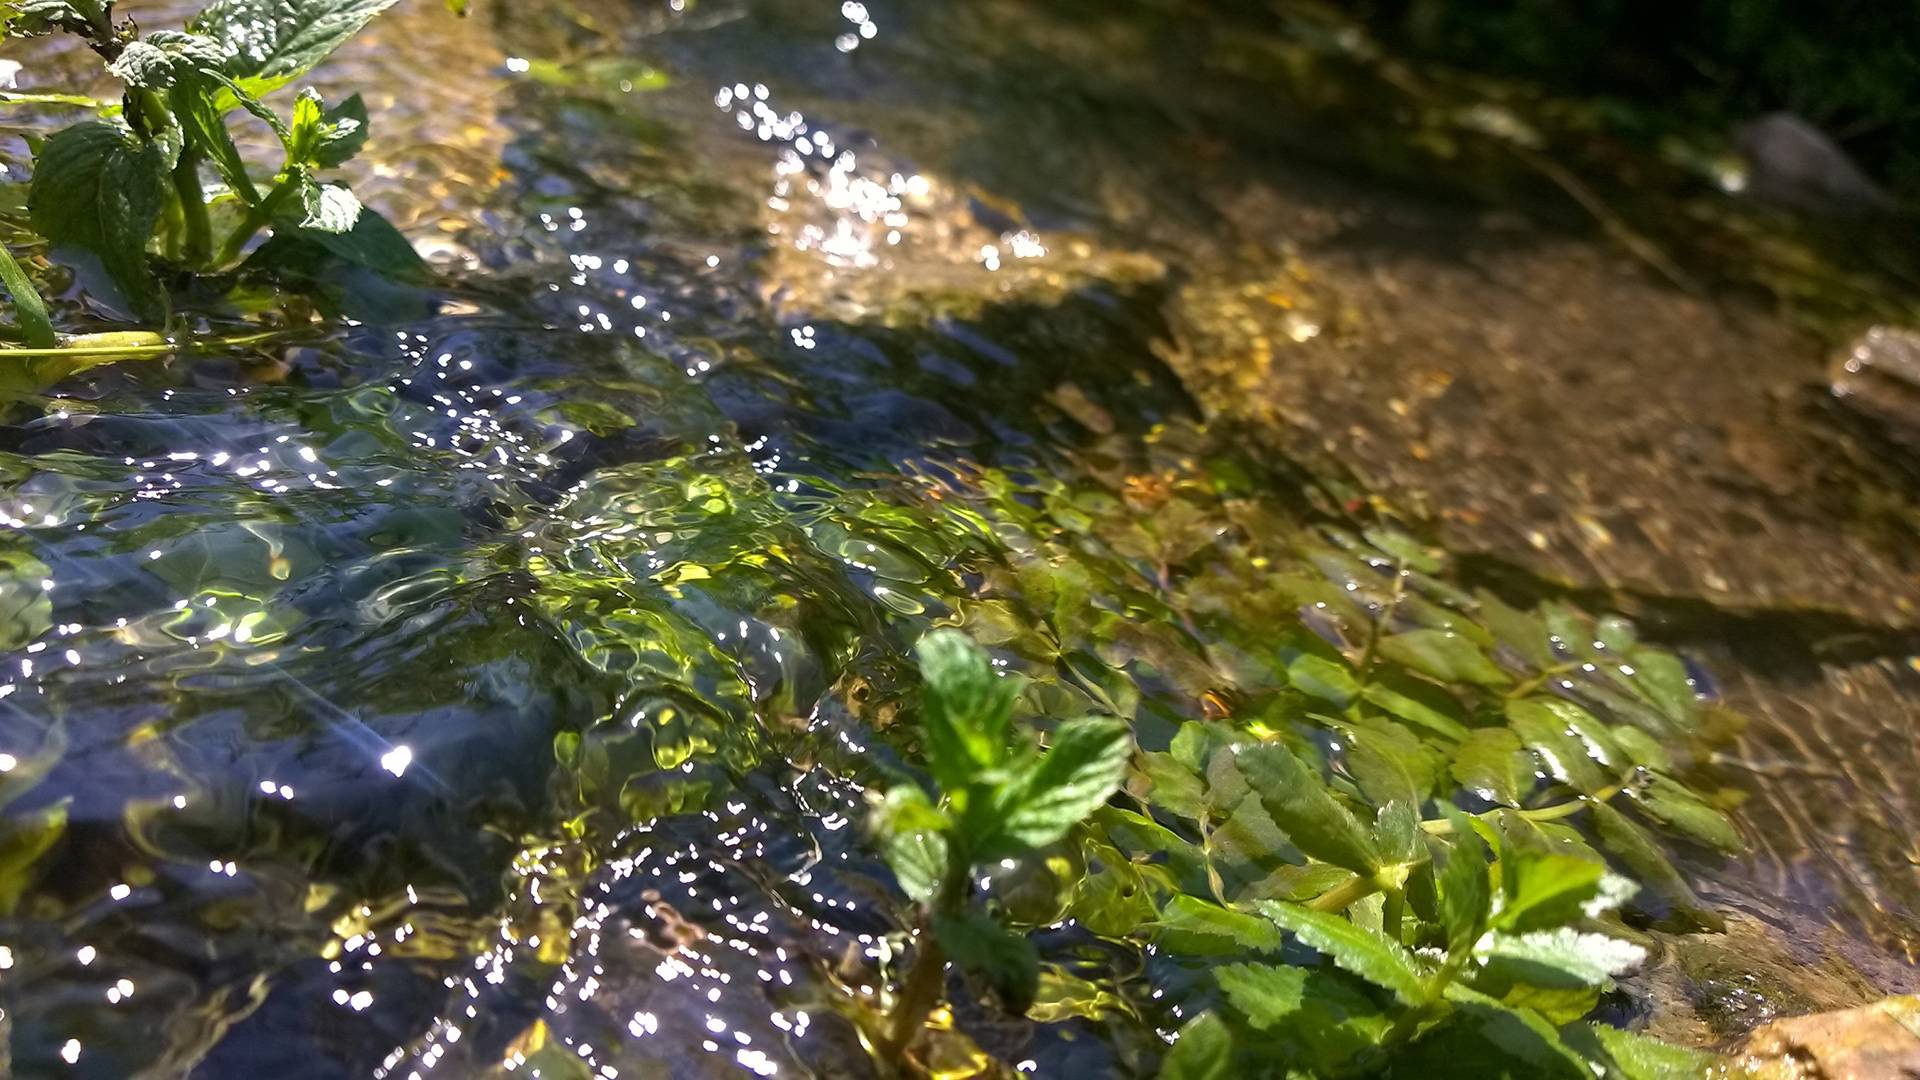 Clear water in stream with green plants visible underneath water